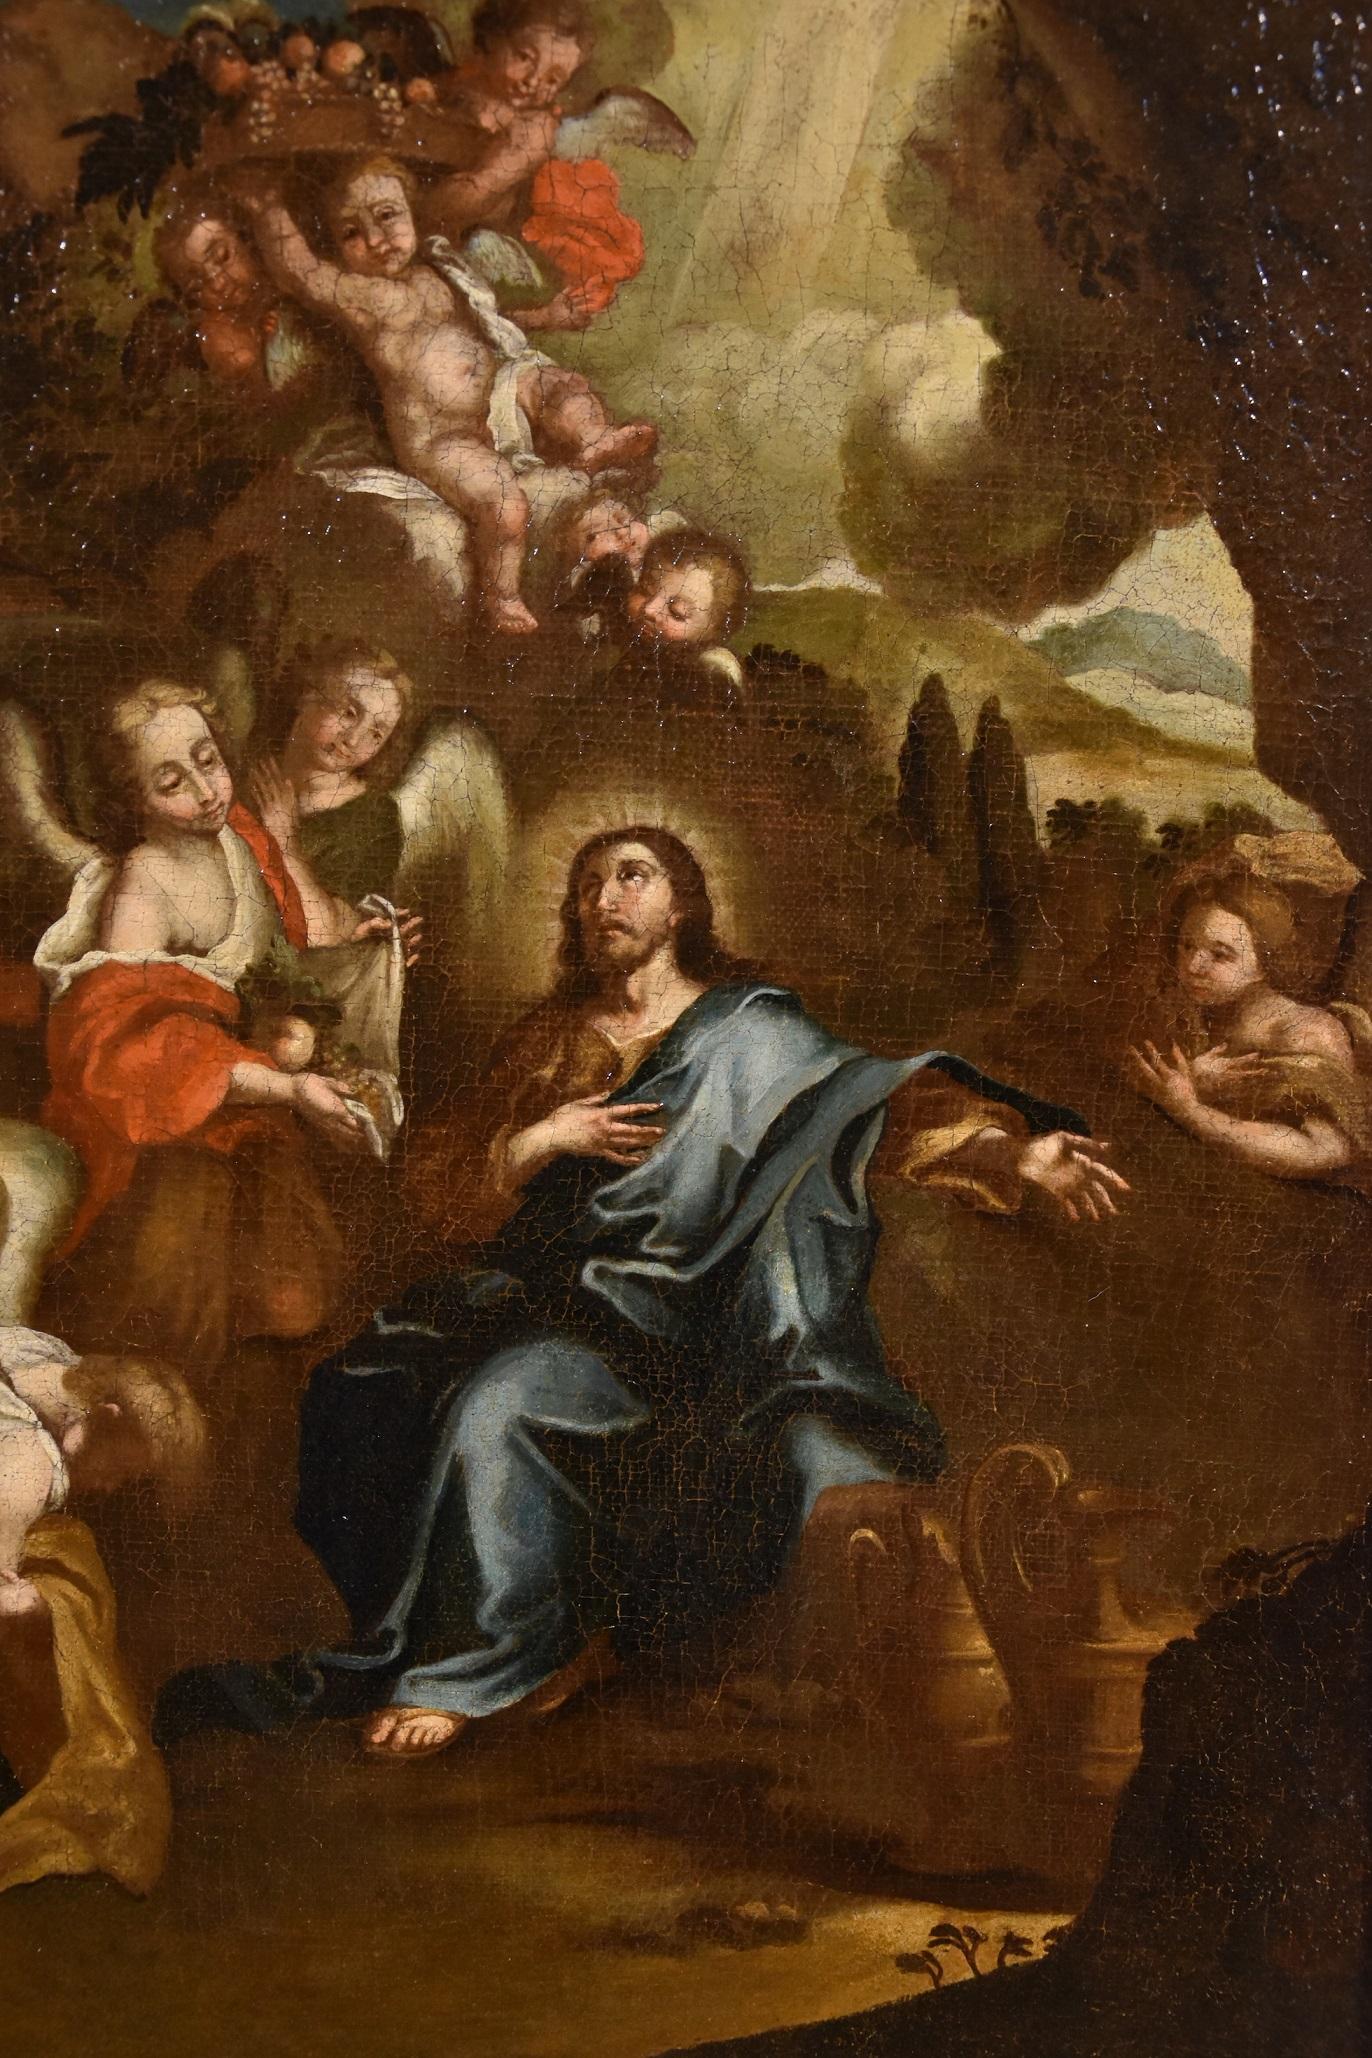 Christ surrounded by angels in the desert
Circle of Pietro da Cortona, born as Pietro Berrettini (Cortona 1597 - Rome 1669)

Oils on canvas (66 x 50 cm. - in frame 80 x 64 cm.)

The proposed painting, of high quality and artistic level, is a work